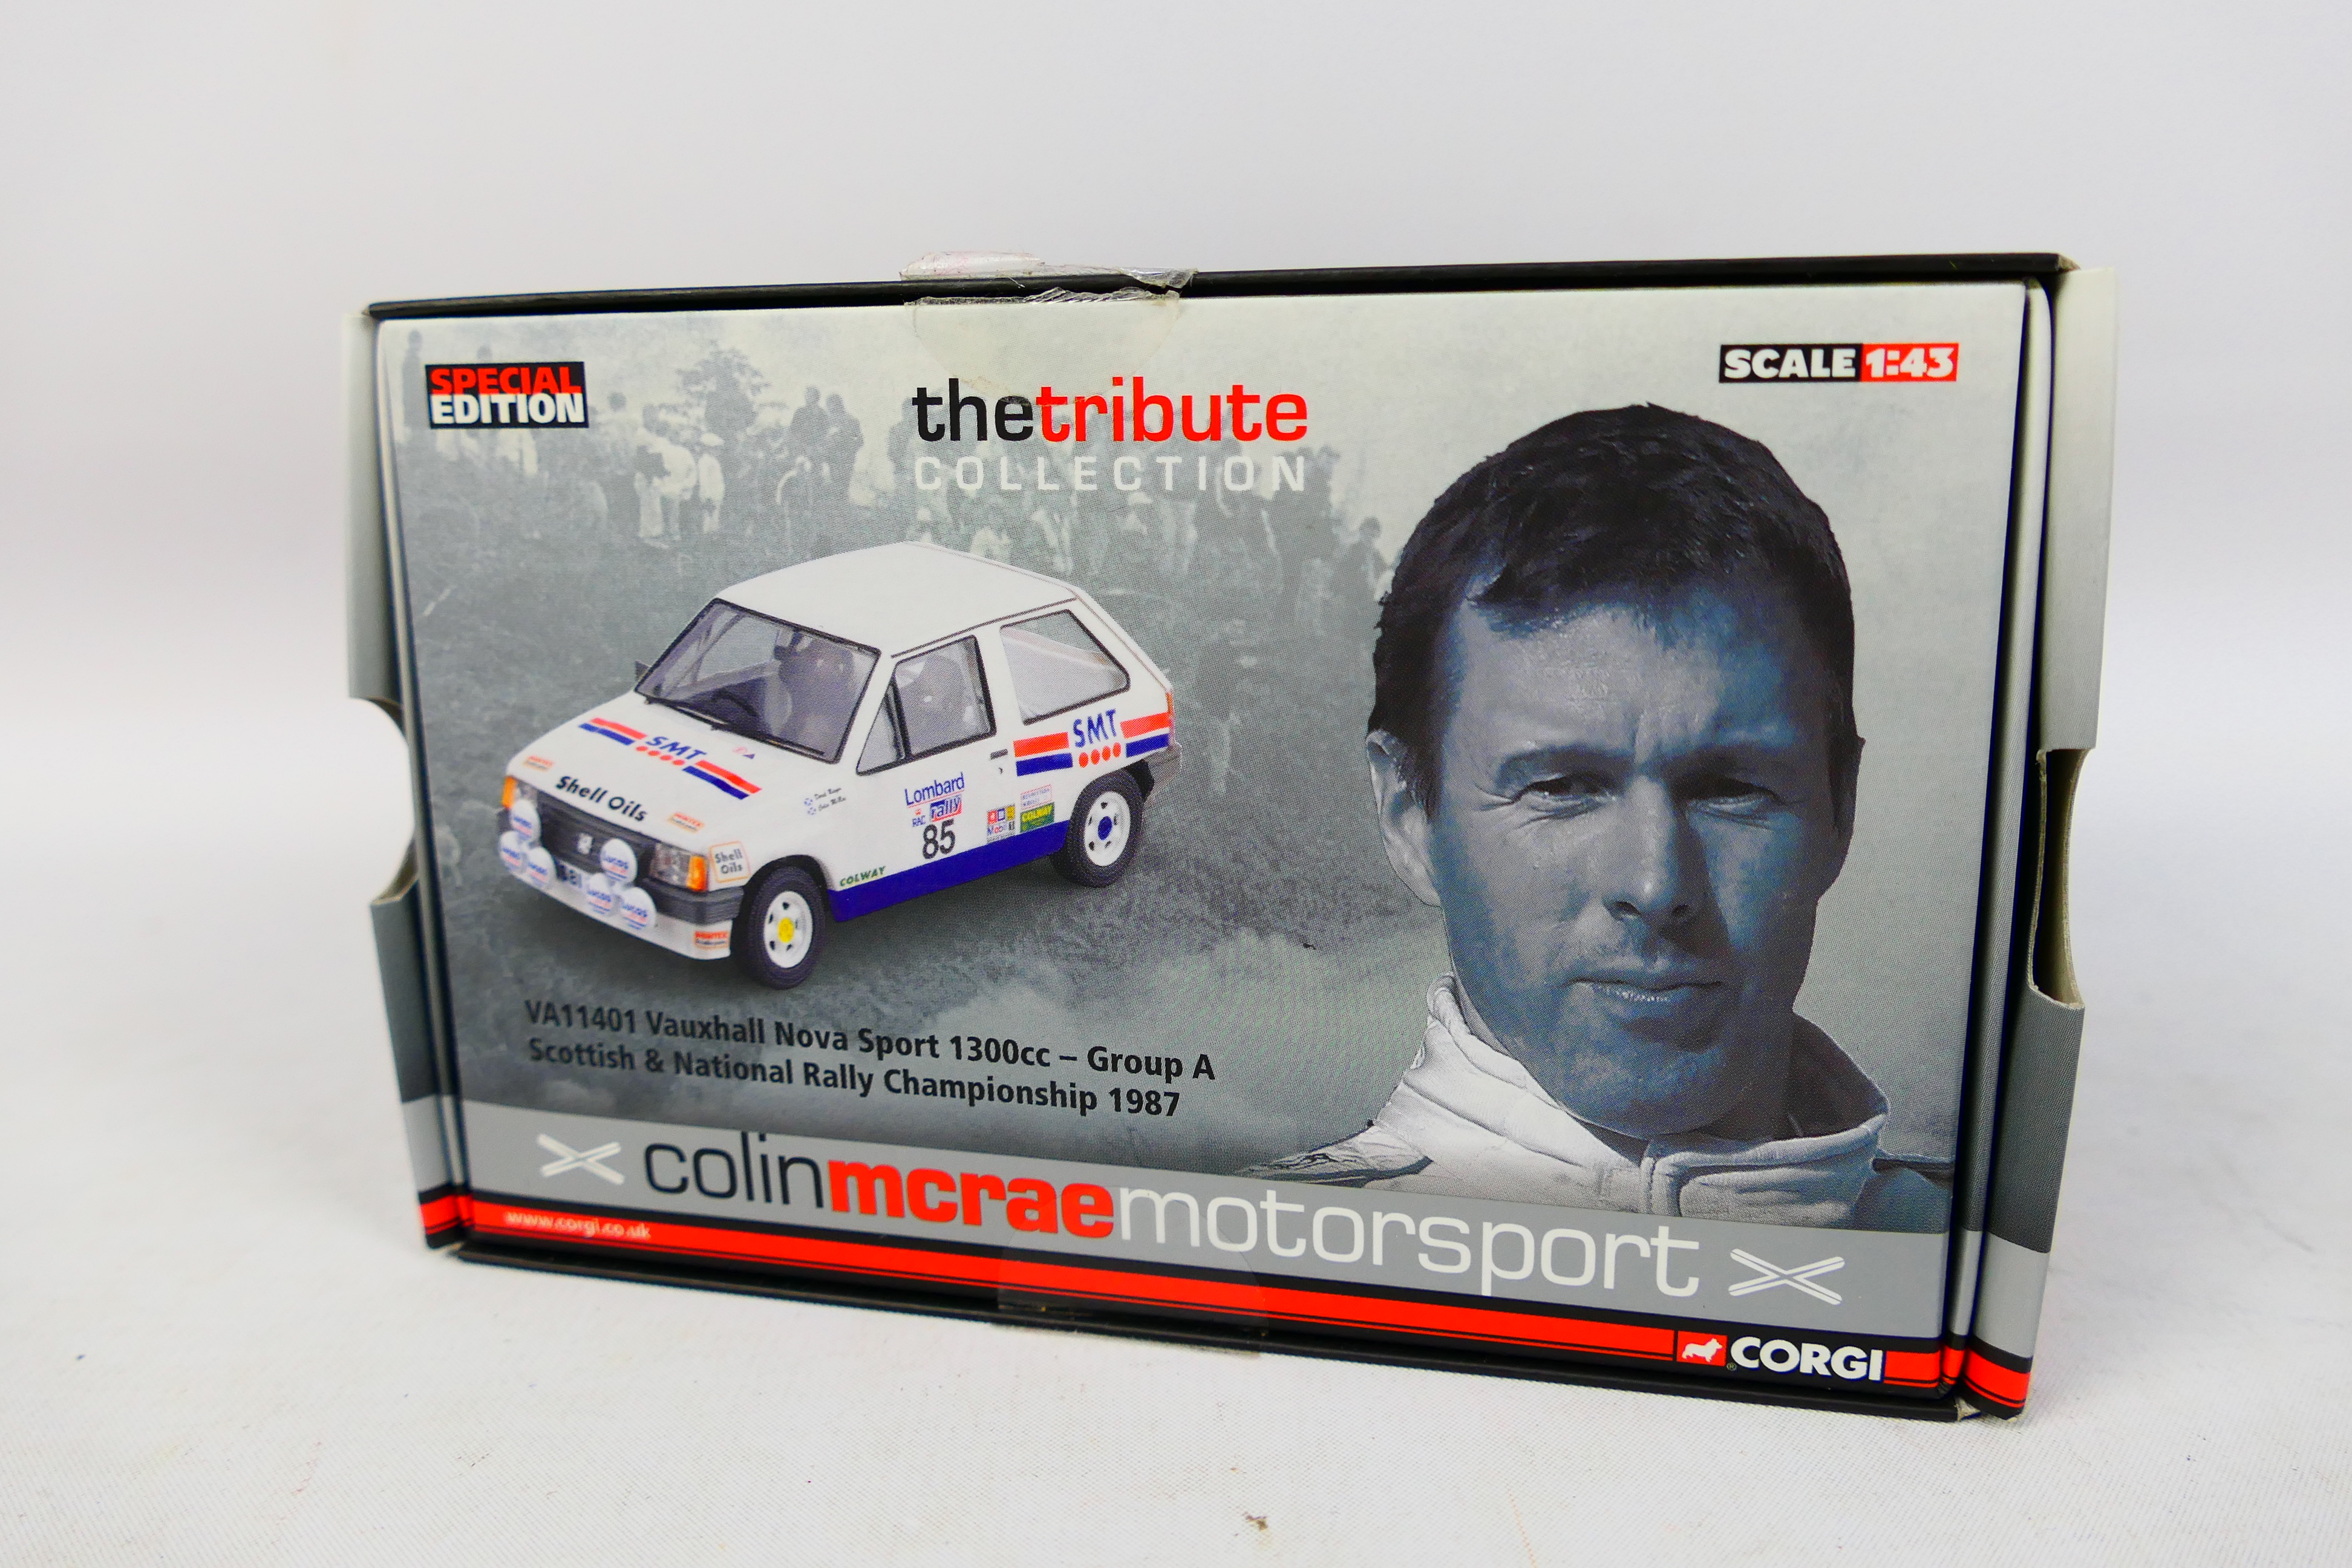 Corgi - A boxed Special Edition 'Colin McRae Motorsport - The Tribute Collection' VA11401 Vauxhall - Image 4 of 4